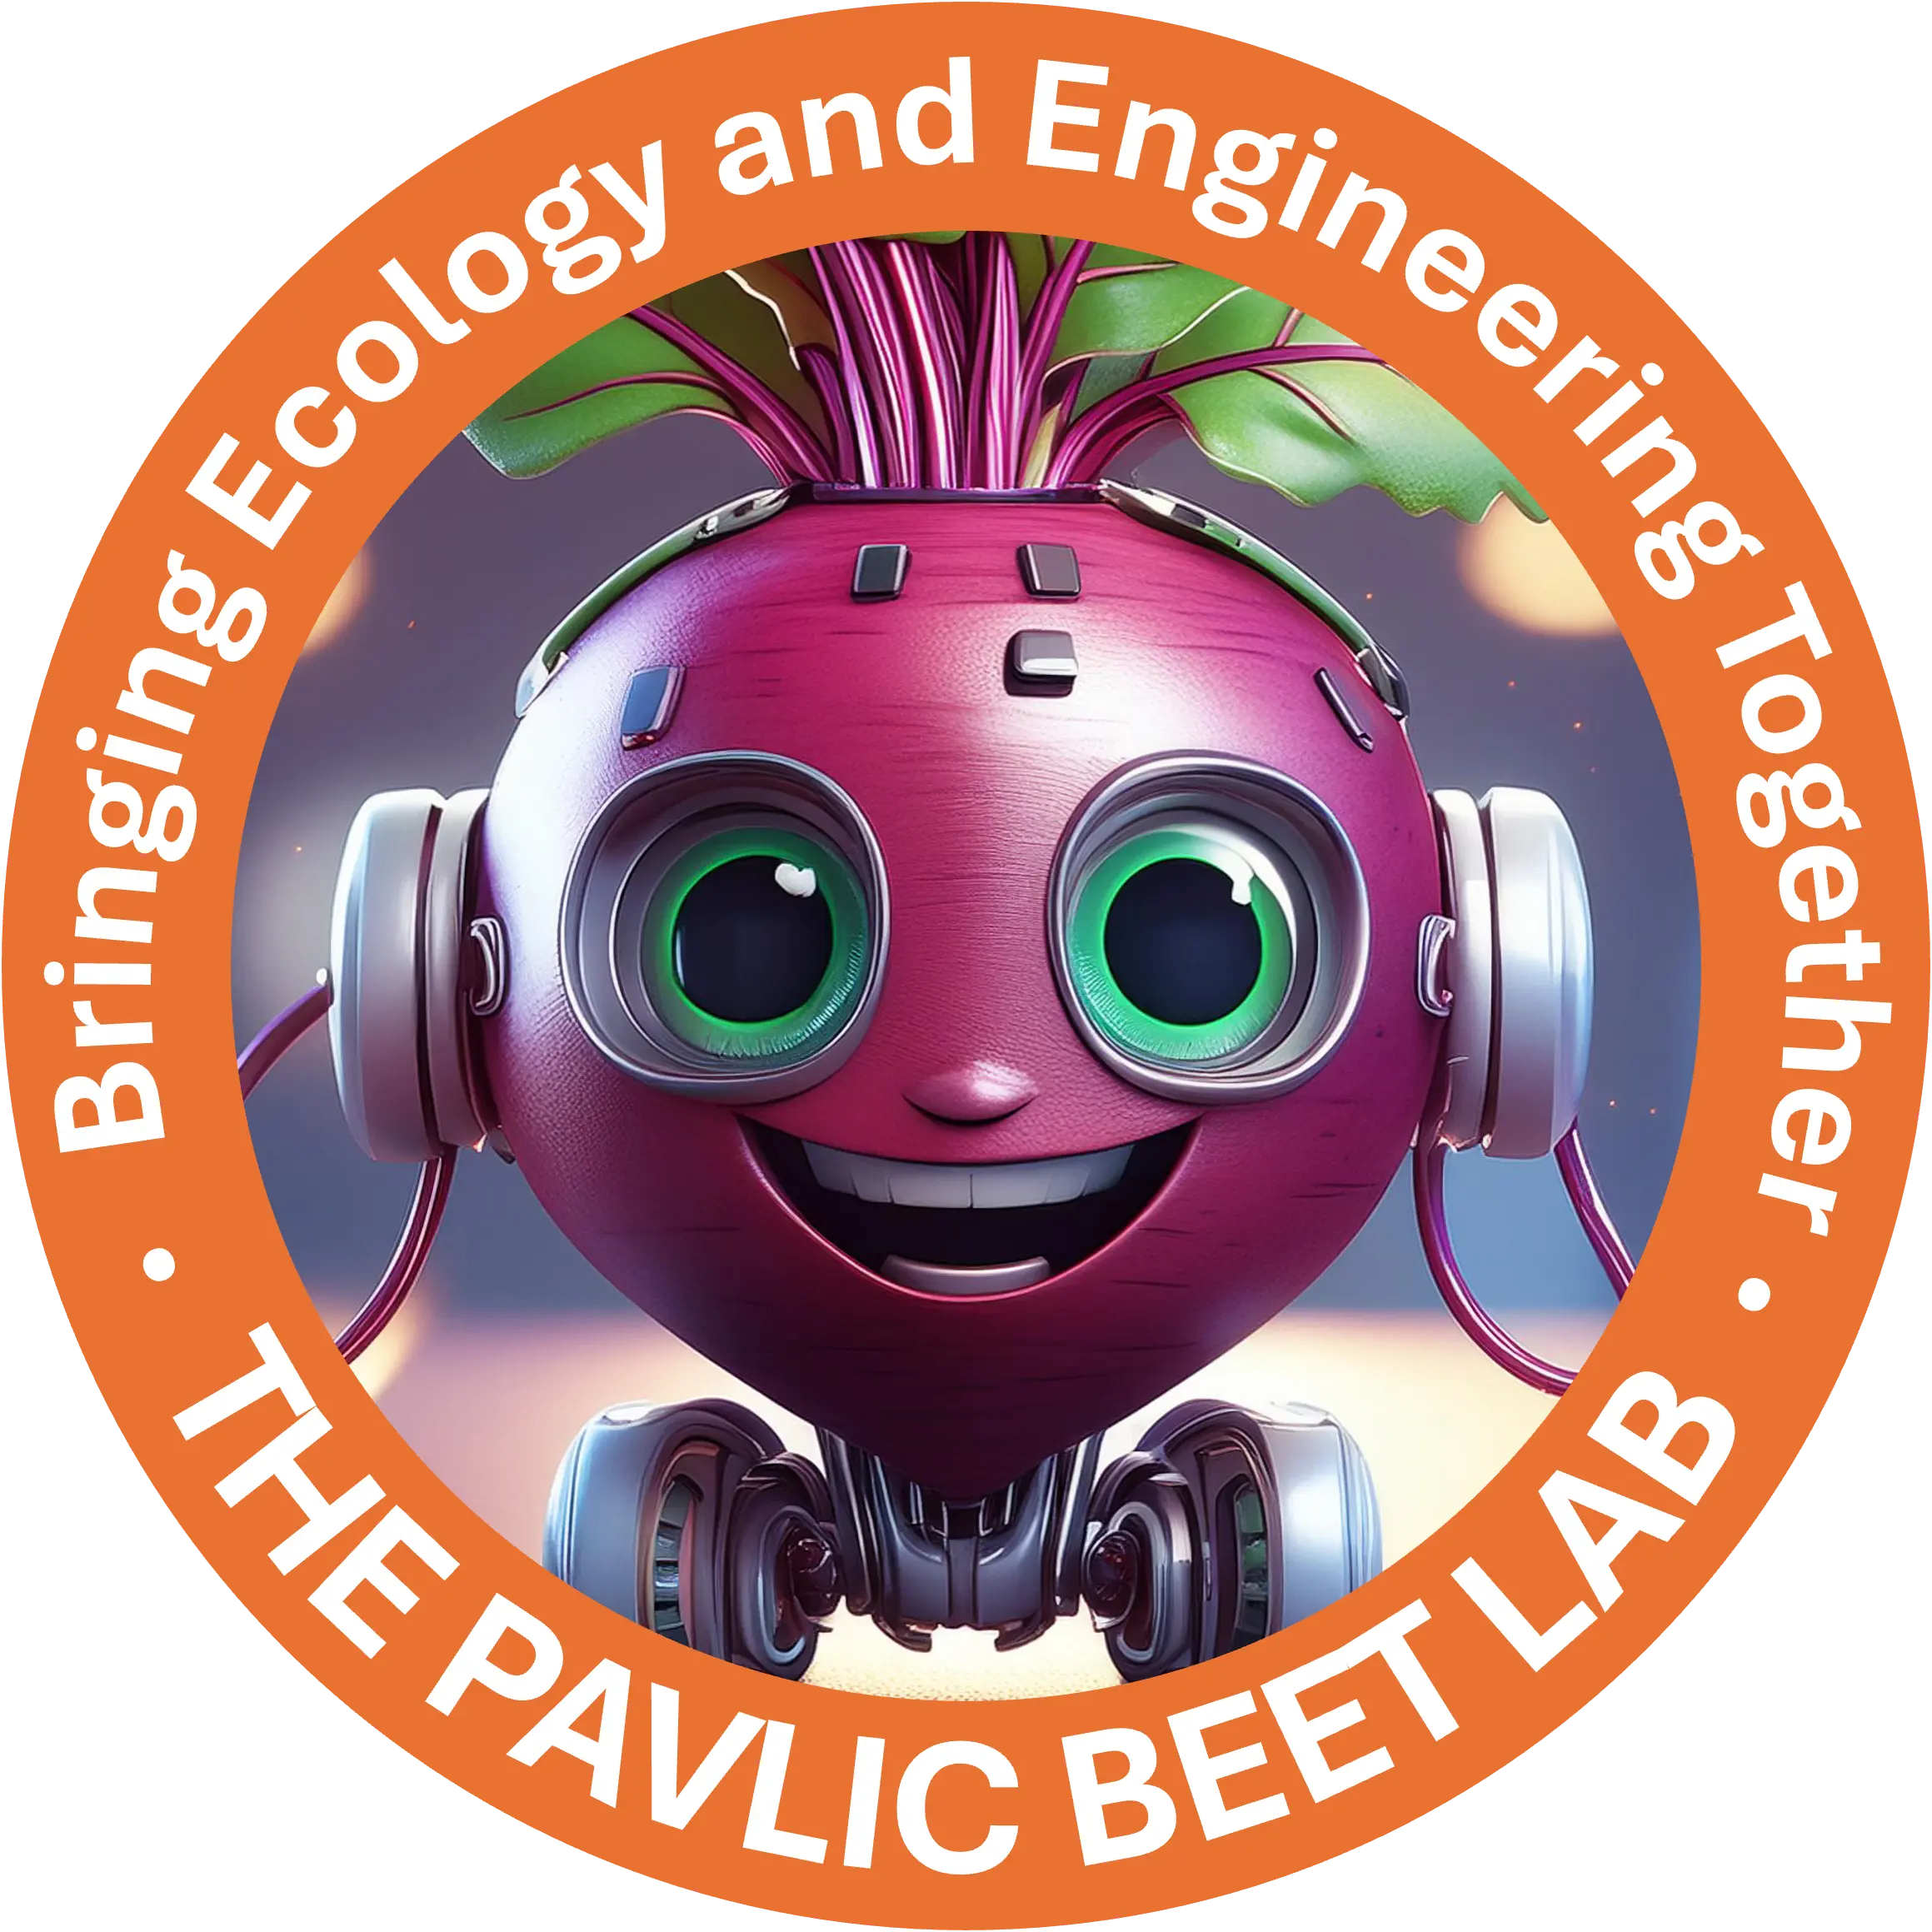 Circular logo with a beet wearing headphones and robotic wheels with an orange banner around the outside that reads "Bringing Ecology and Engineering Together" and "THE PAVLIC BEET LAB". Artistic image was AI generated via Adobe Firefly.